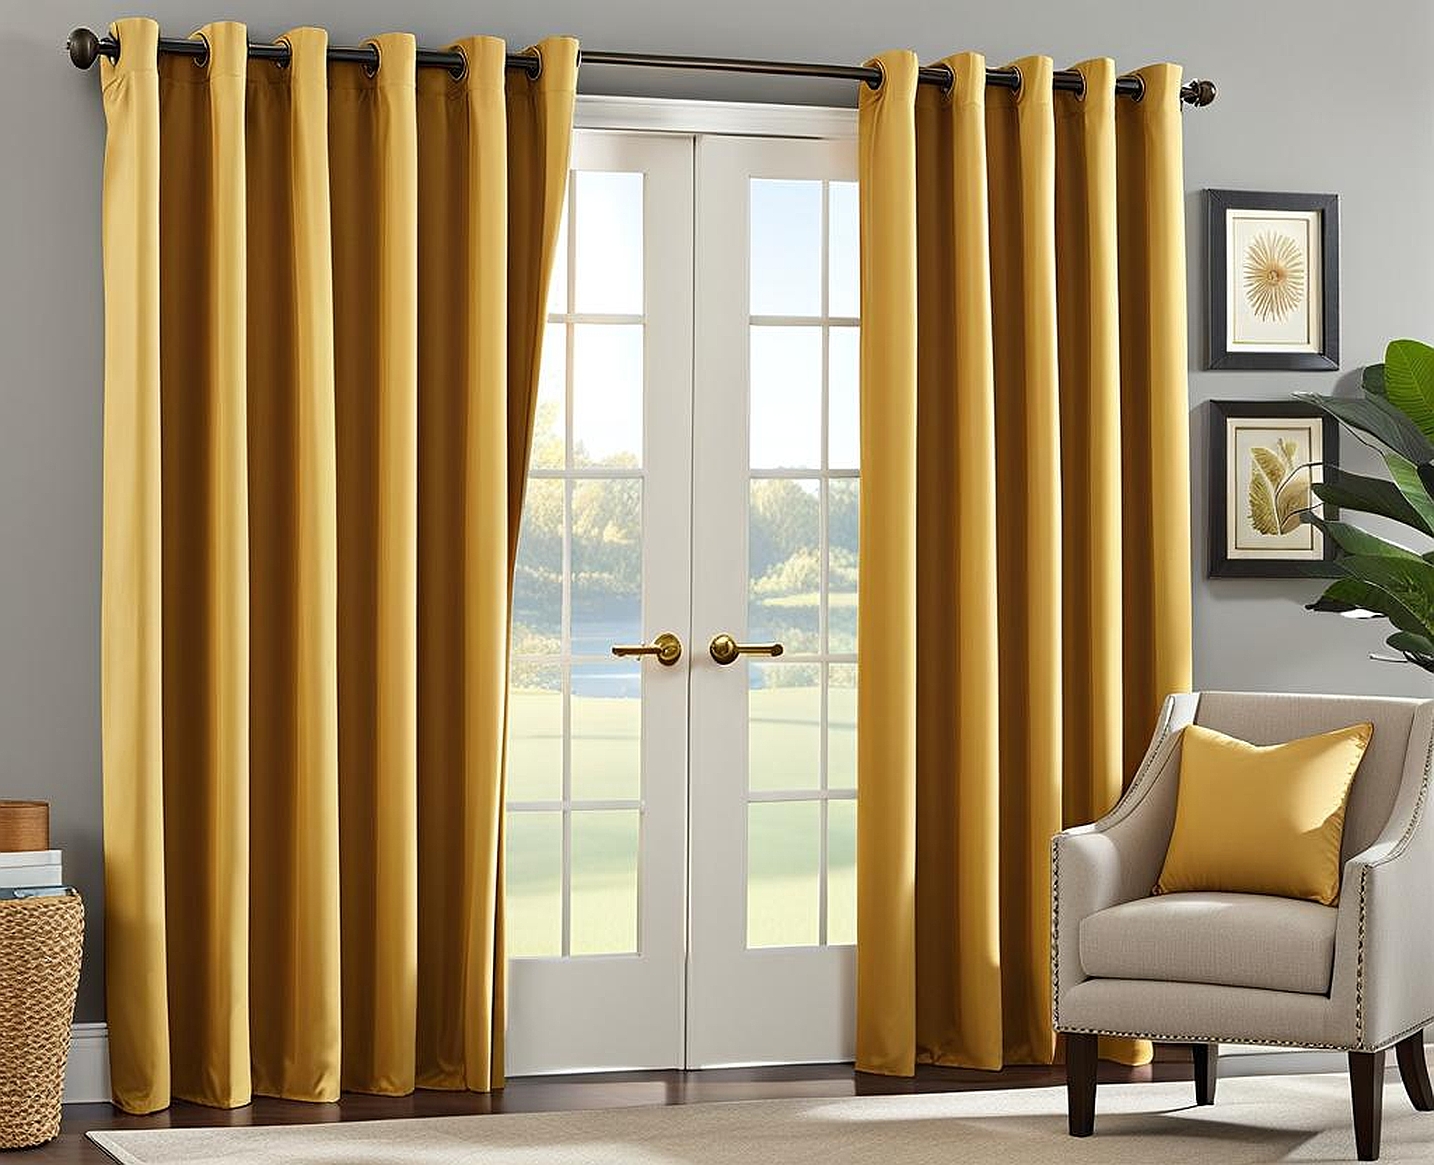 Sun Zero Blackout Curtains Level 4 for Enhanced Safety and Security